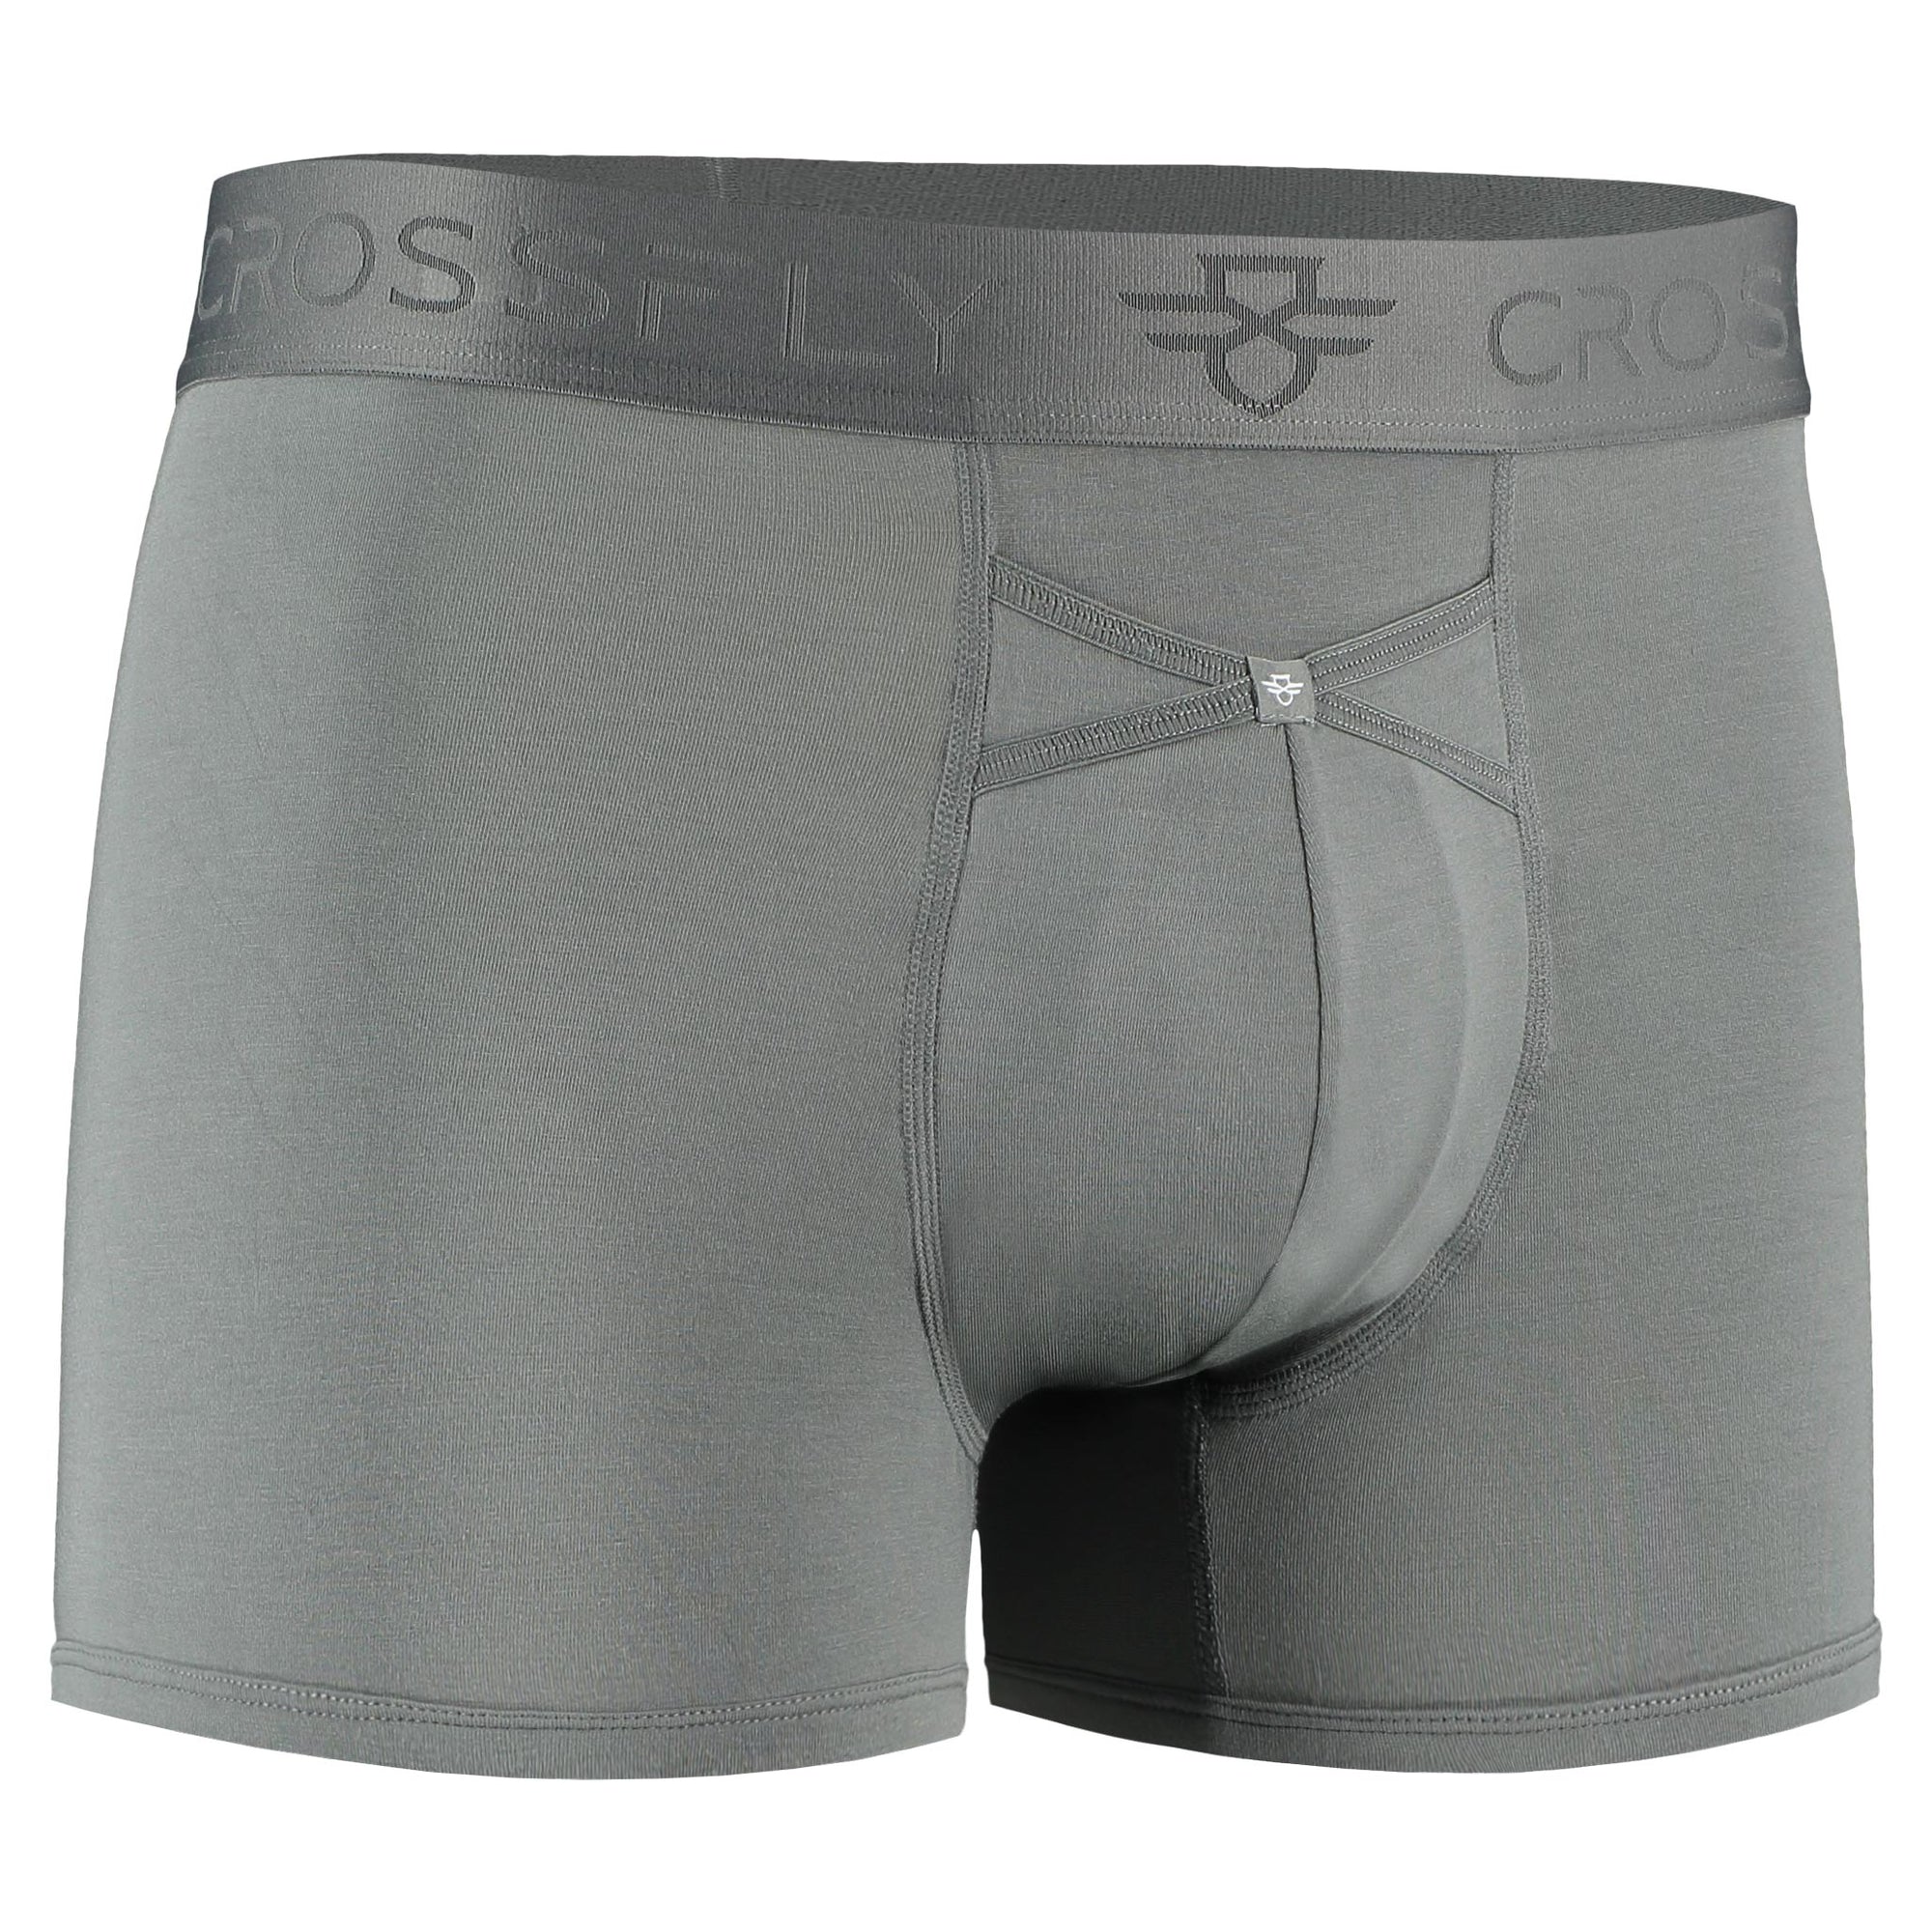 Crossfly men's IKON 3" charcoal trunks from the Everyday series, featuring X-Fly and Coccoon internal pocket support.